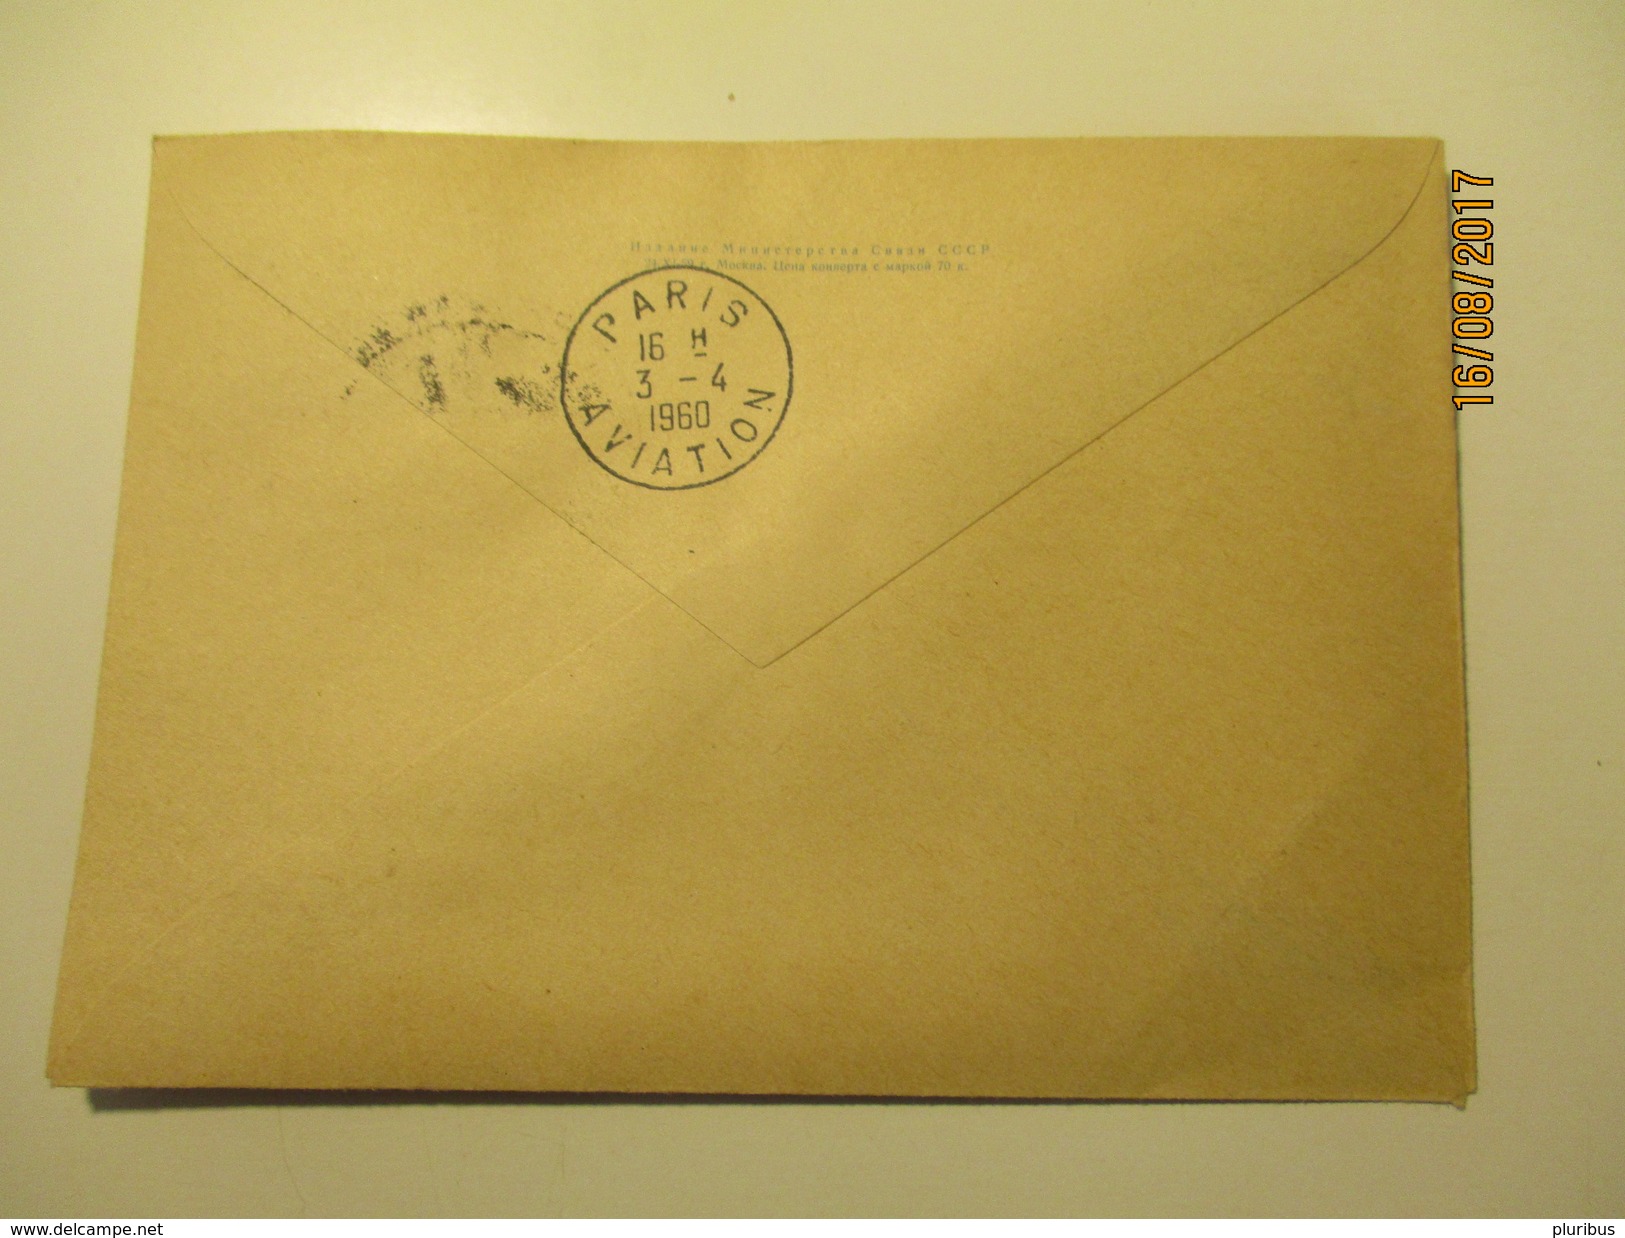 RUSSIA USSR POSTAL STATIONERY AIR MAIL COVER , FLIGHT CARAVELLE MOSCOW PARIS MOSCOW 1960 PARIS AVIATION   ,0 - 1950-59